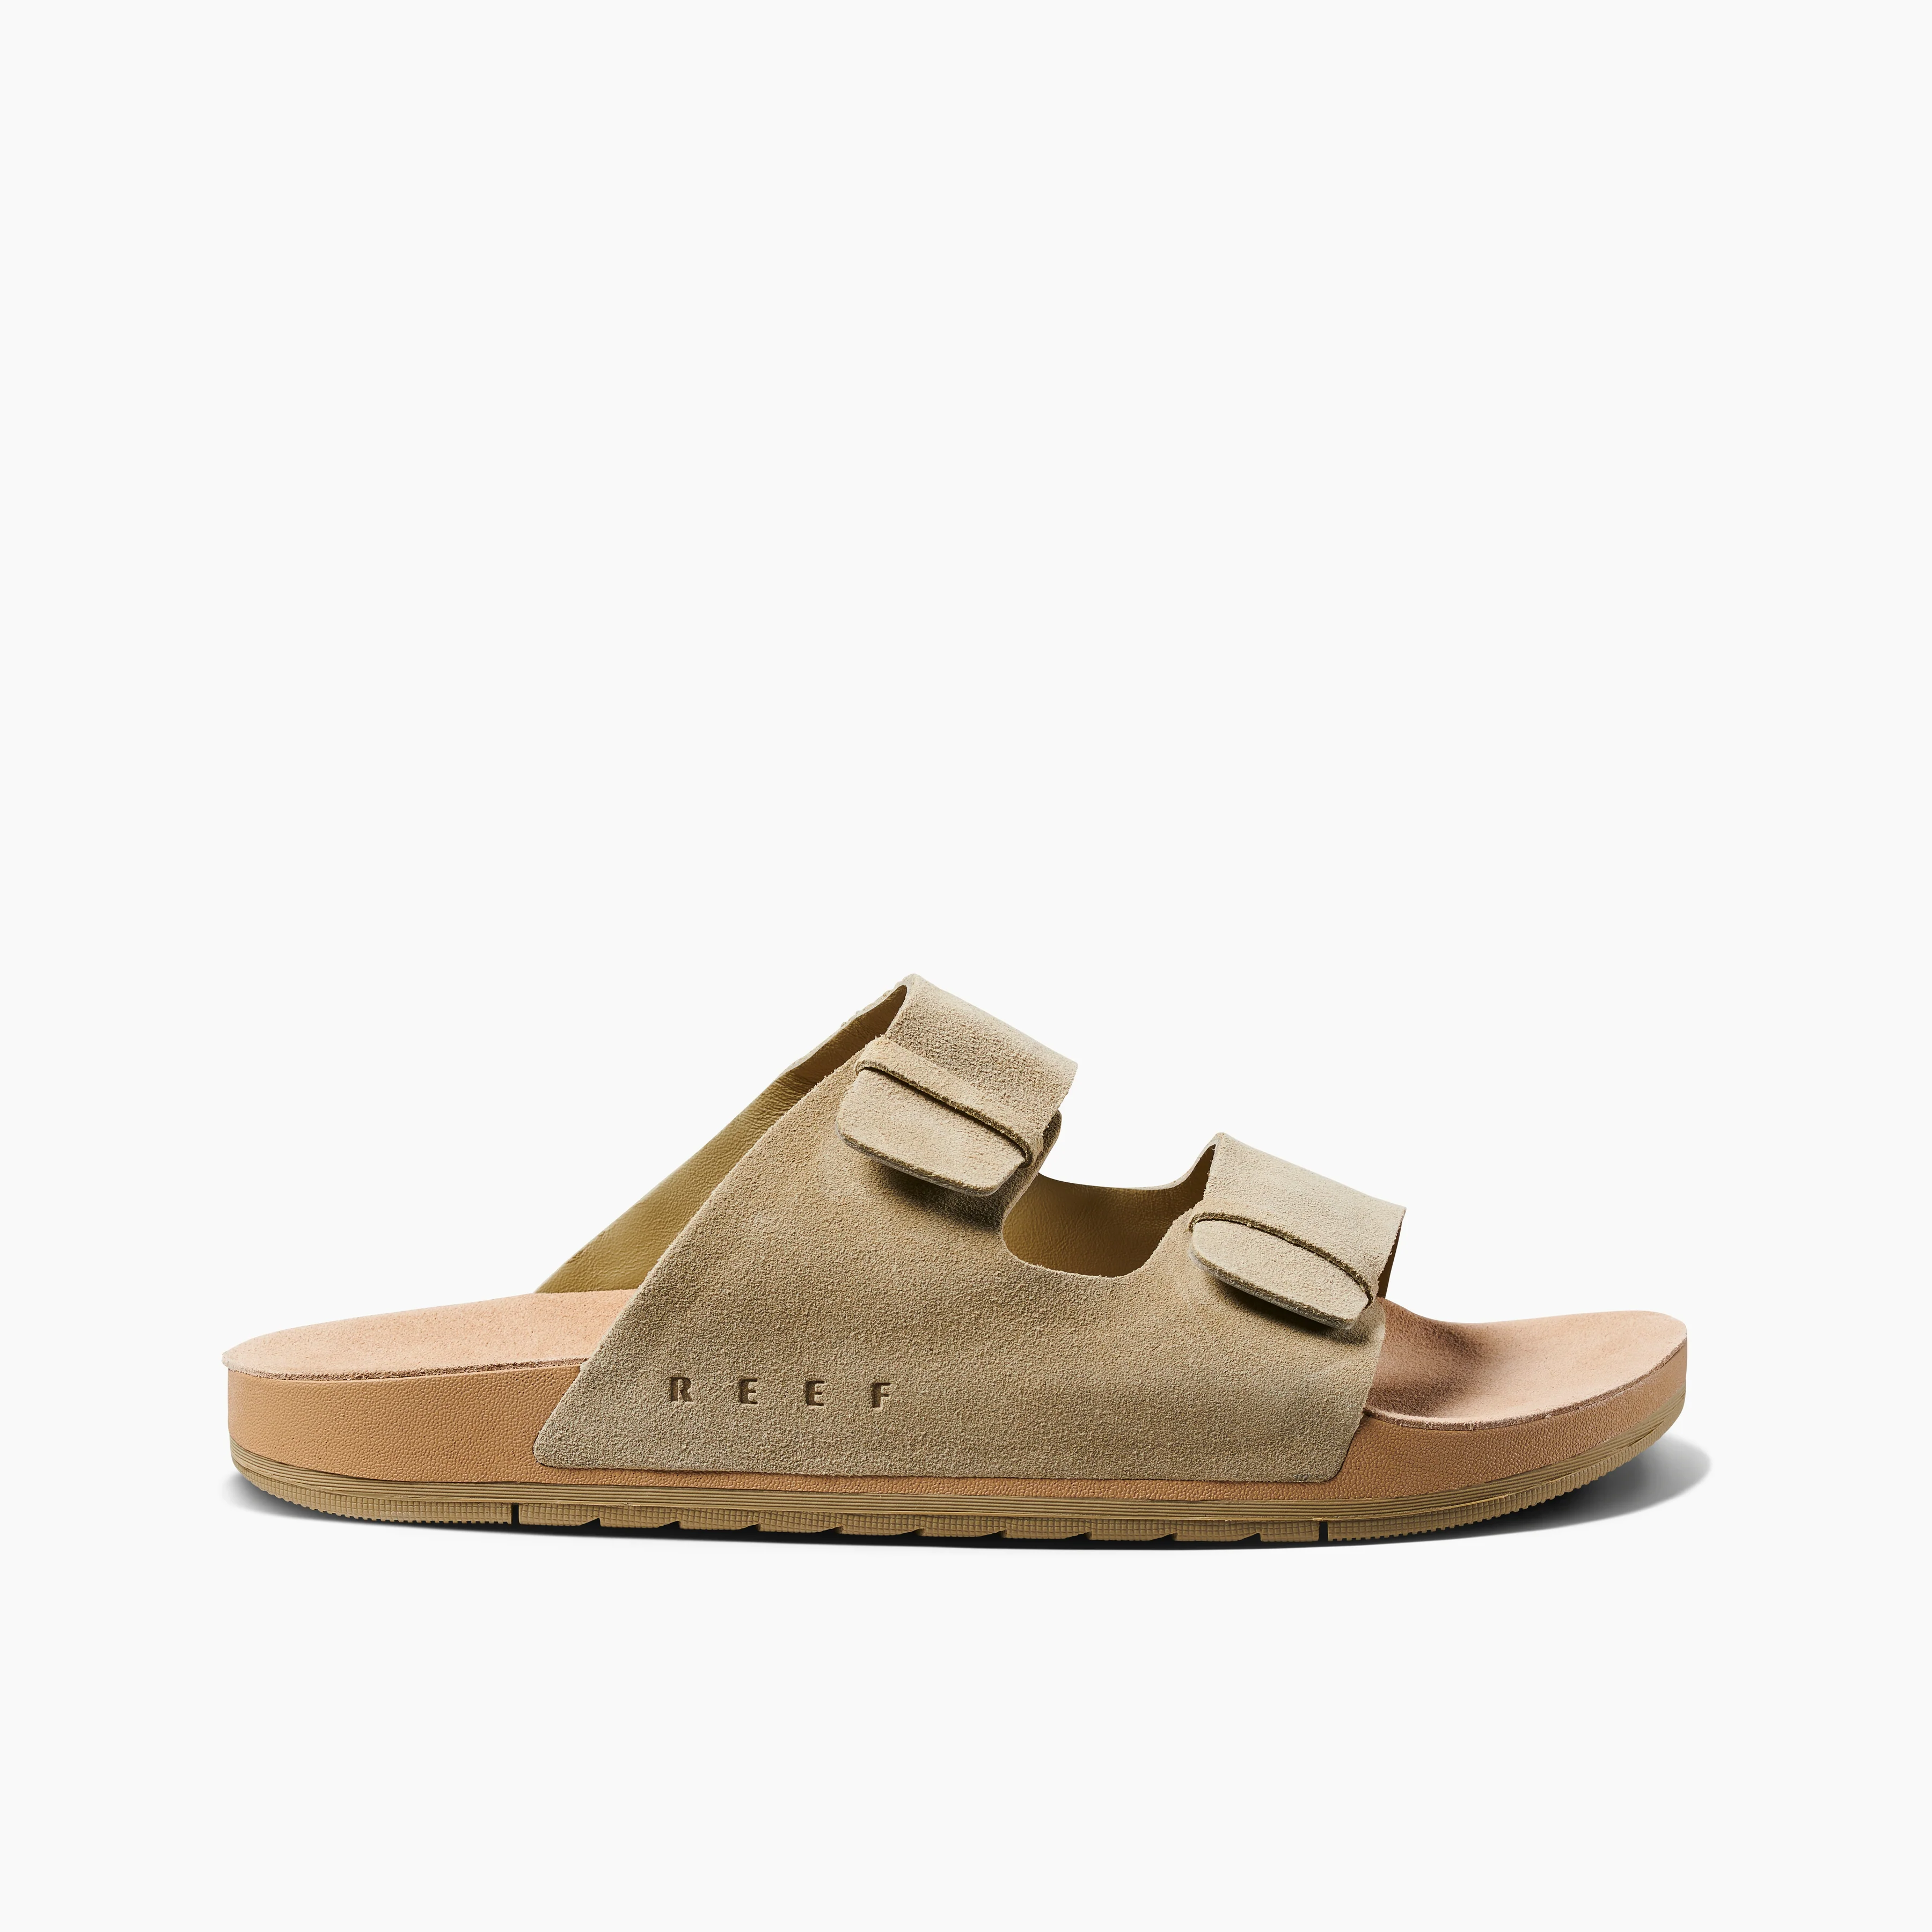 REEF leather sandals with double straps in beige (Ojai two bar)